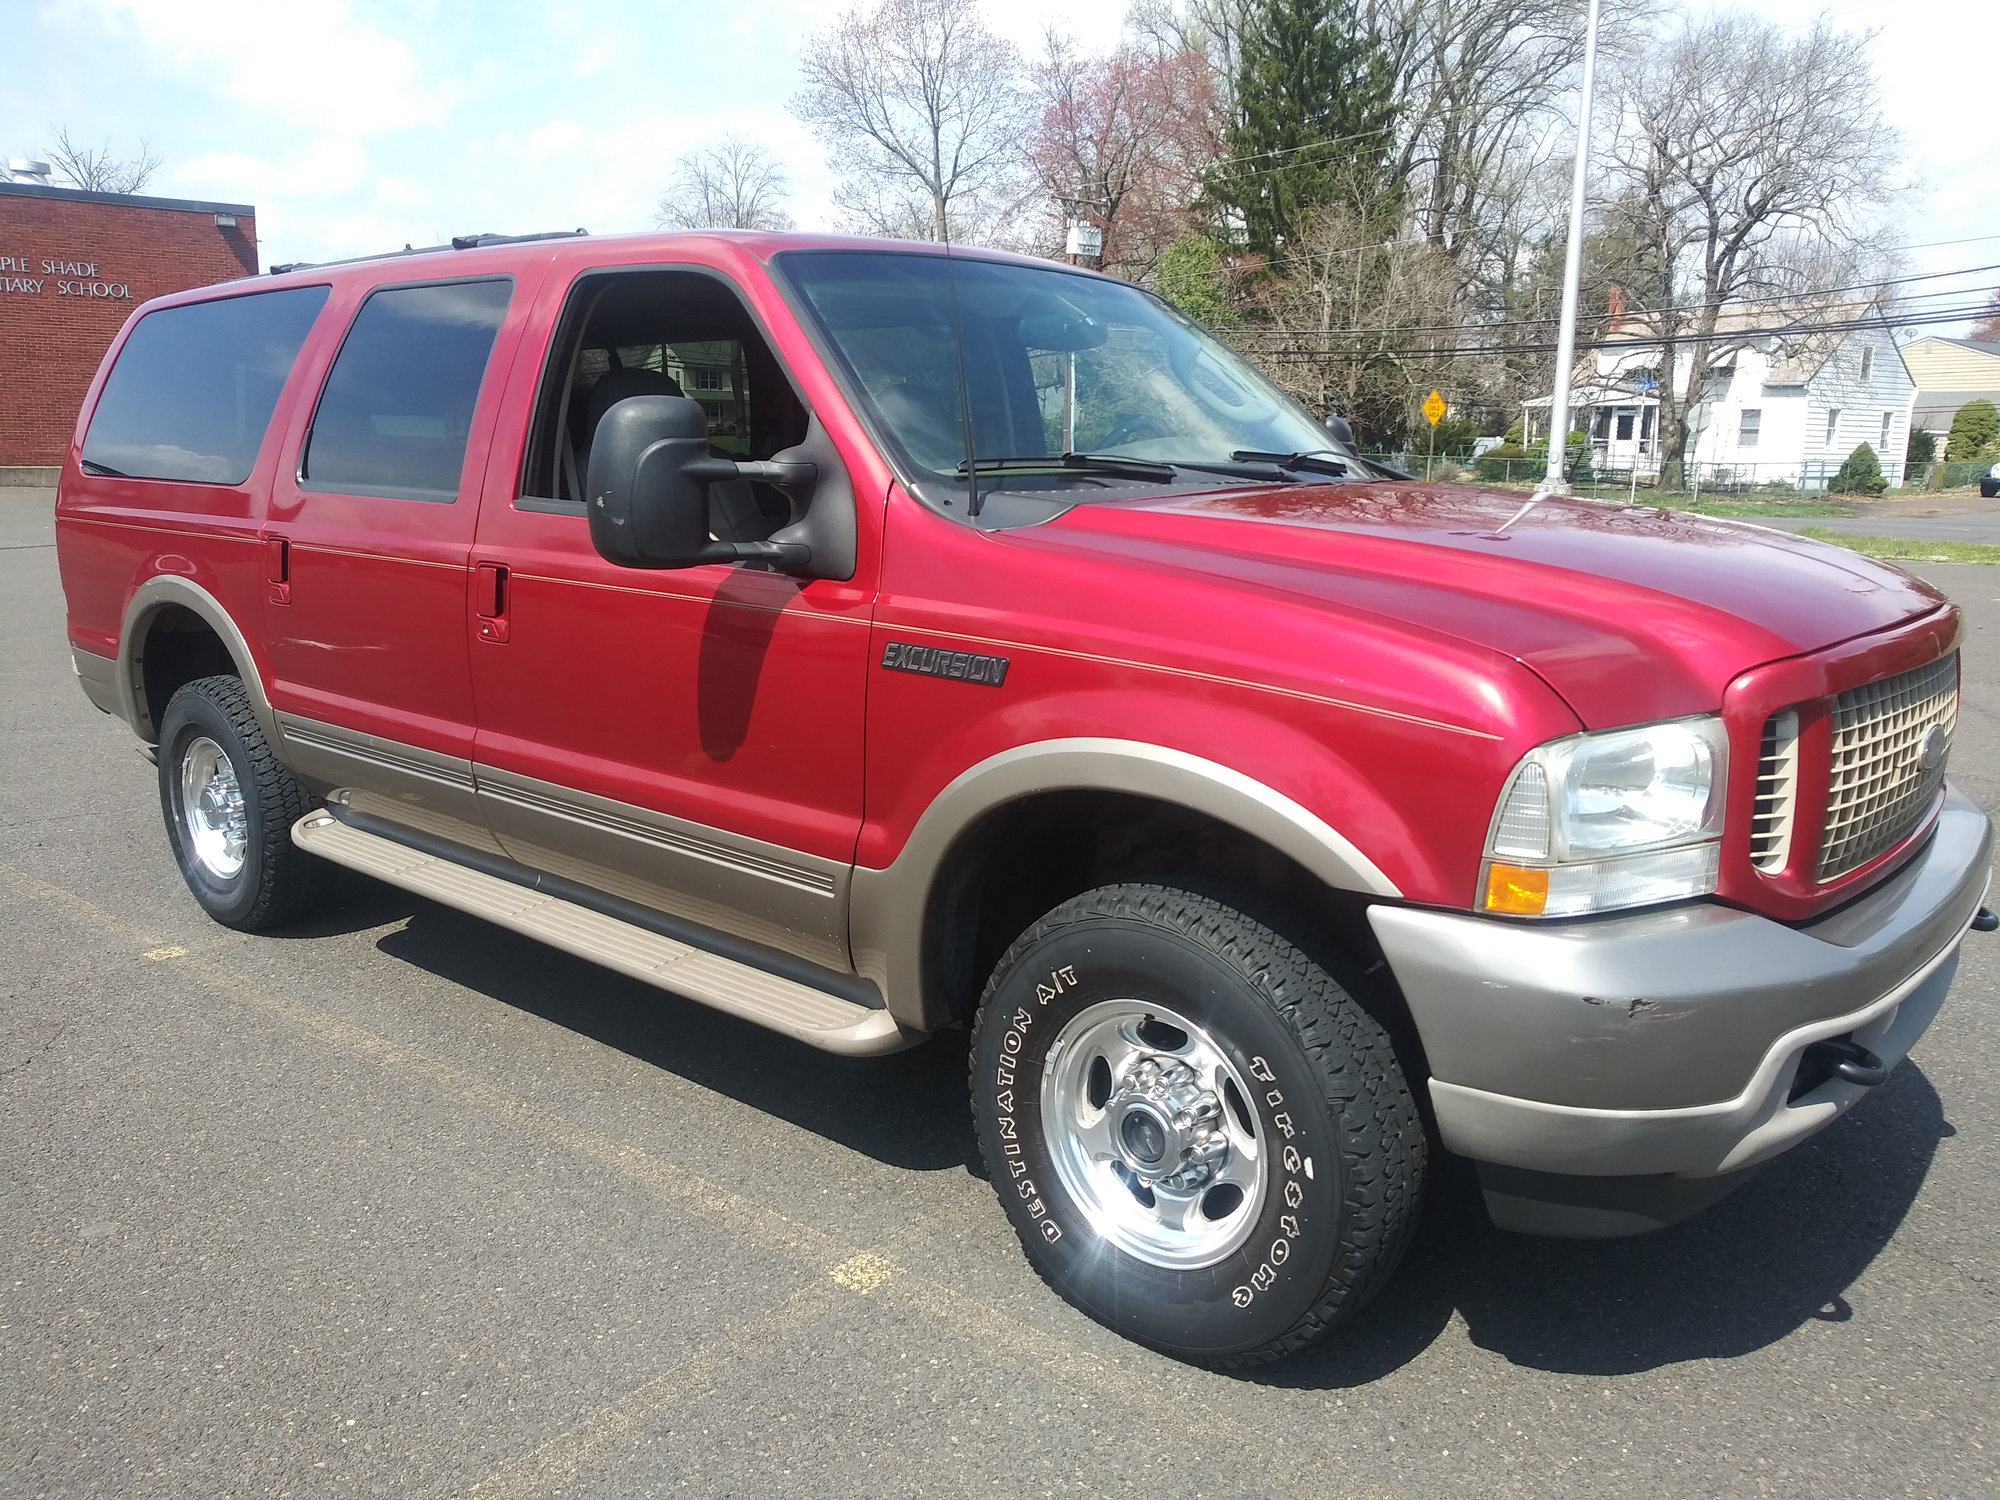 2003 Ford Excursion - 2003 Ford excursion 58k miles v10 4x4 - Used - VIN 1fmnu45s63ea35625 - 58,000 Miles - 10 cyl - 4WD - Automatic - SUV - Red - Croydon, PA 19021, United States